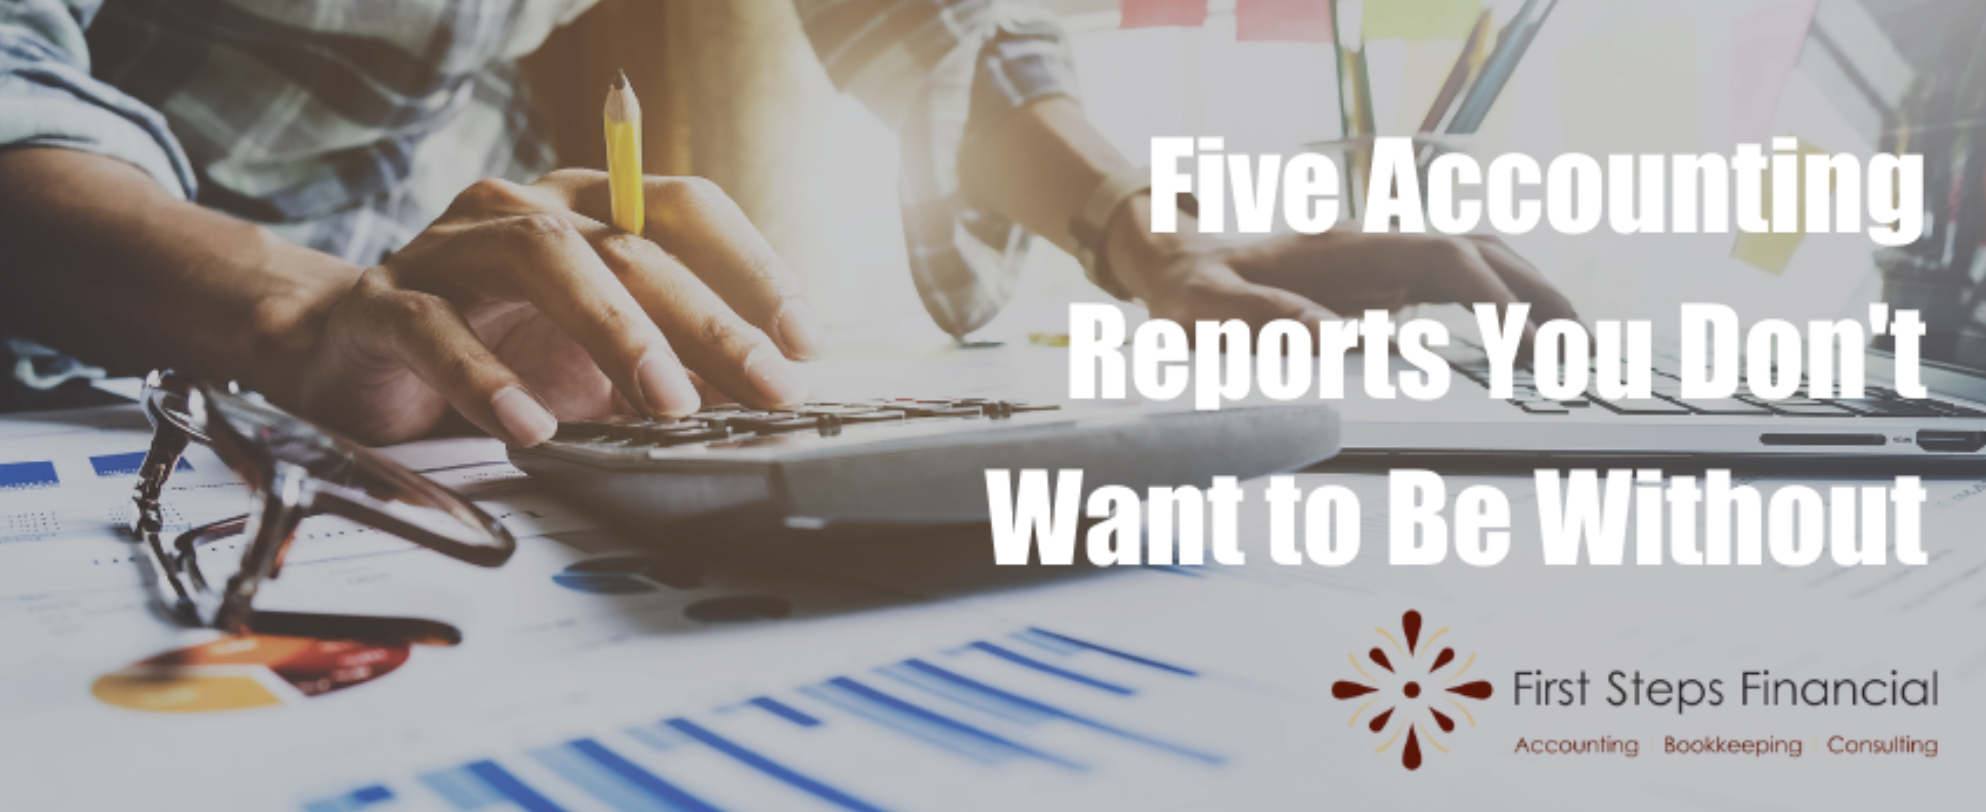 5 Accounting Reports You Don’t Want to be Without